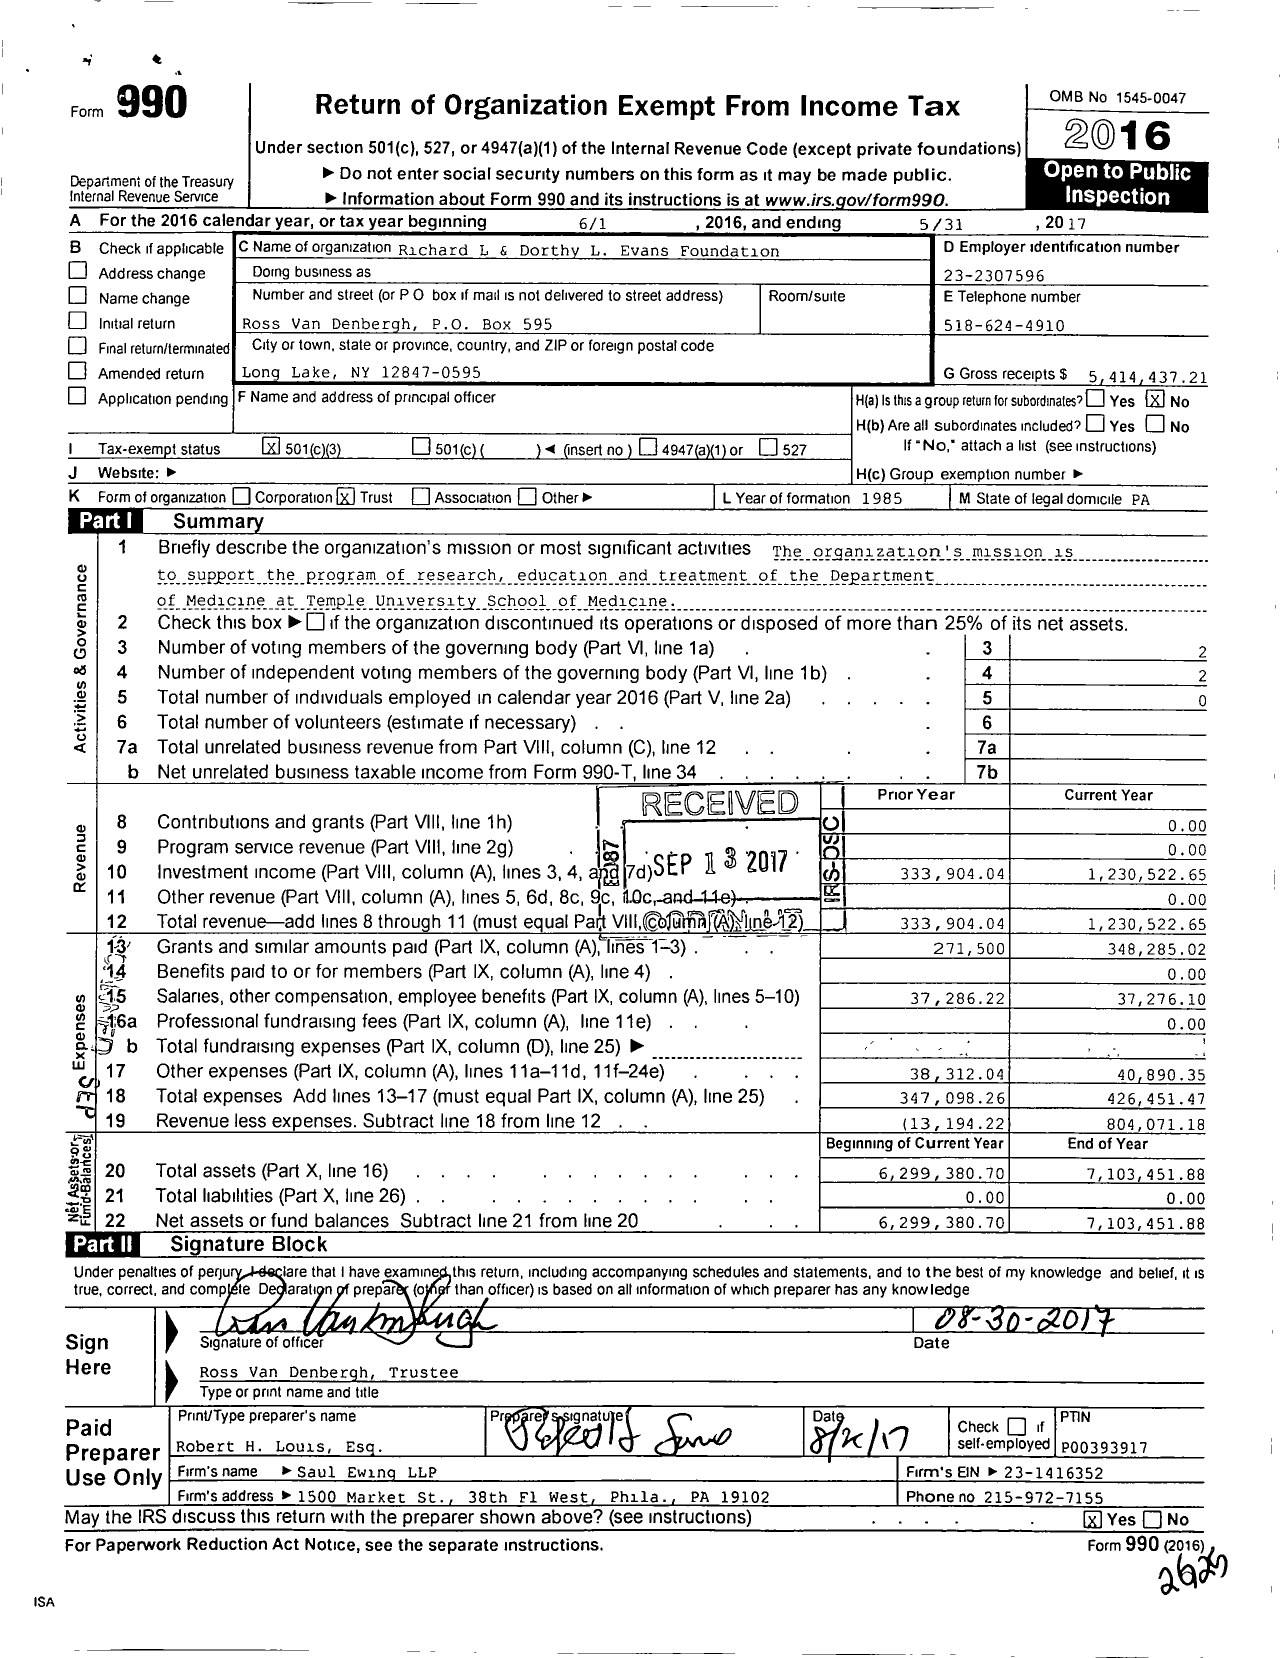 Image of first page of 2016 Form 990 for Richard L and Dorothy L Evans Foundation